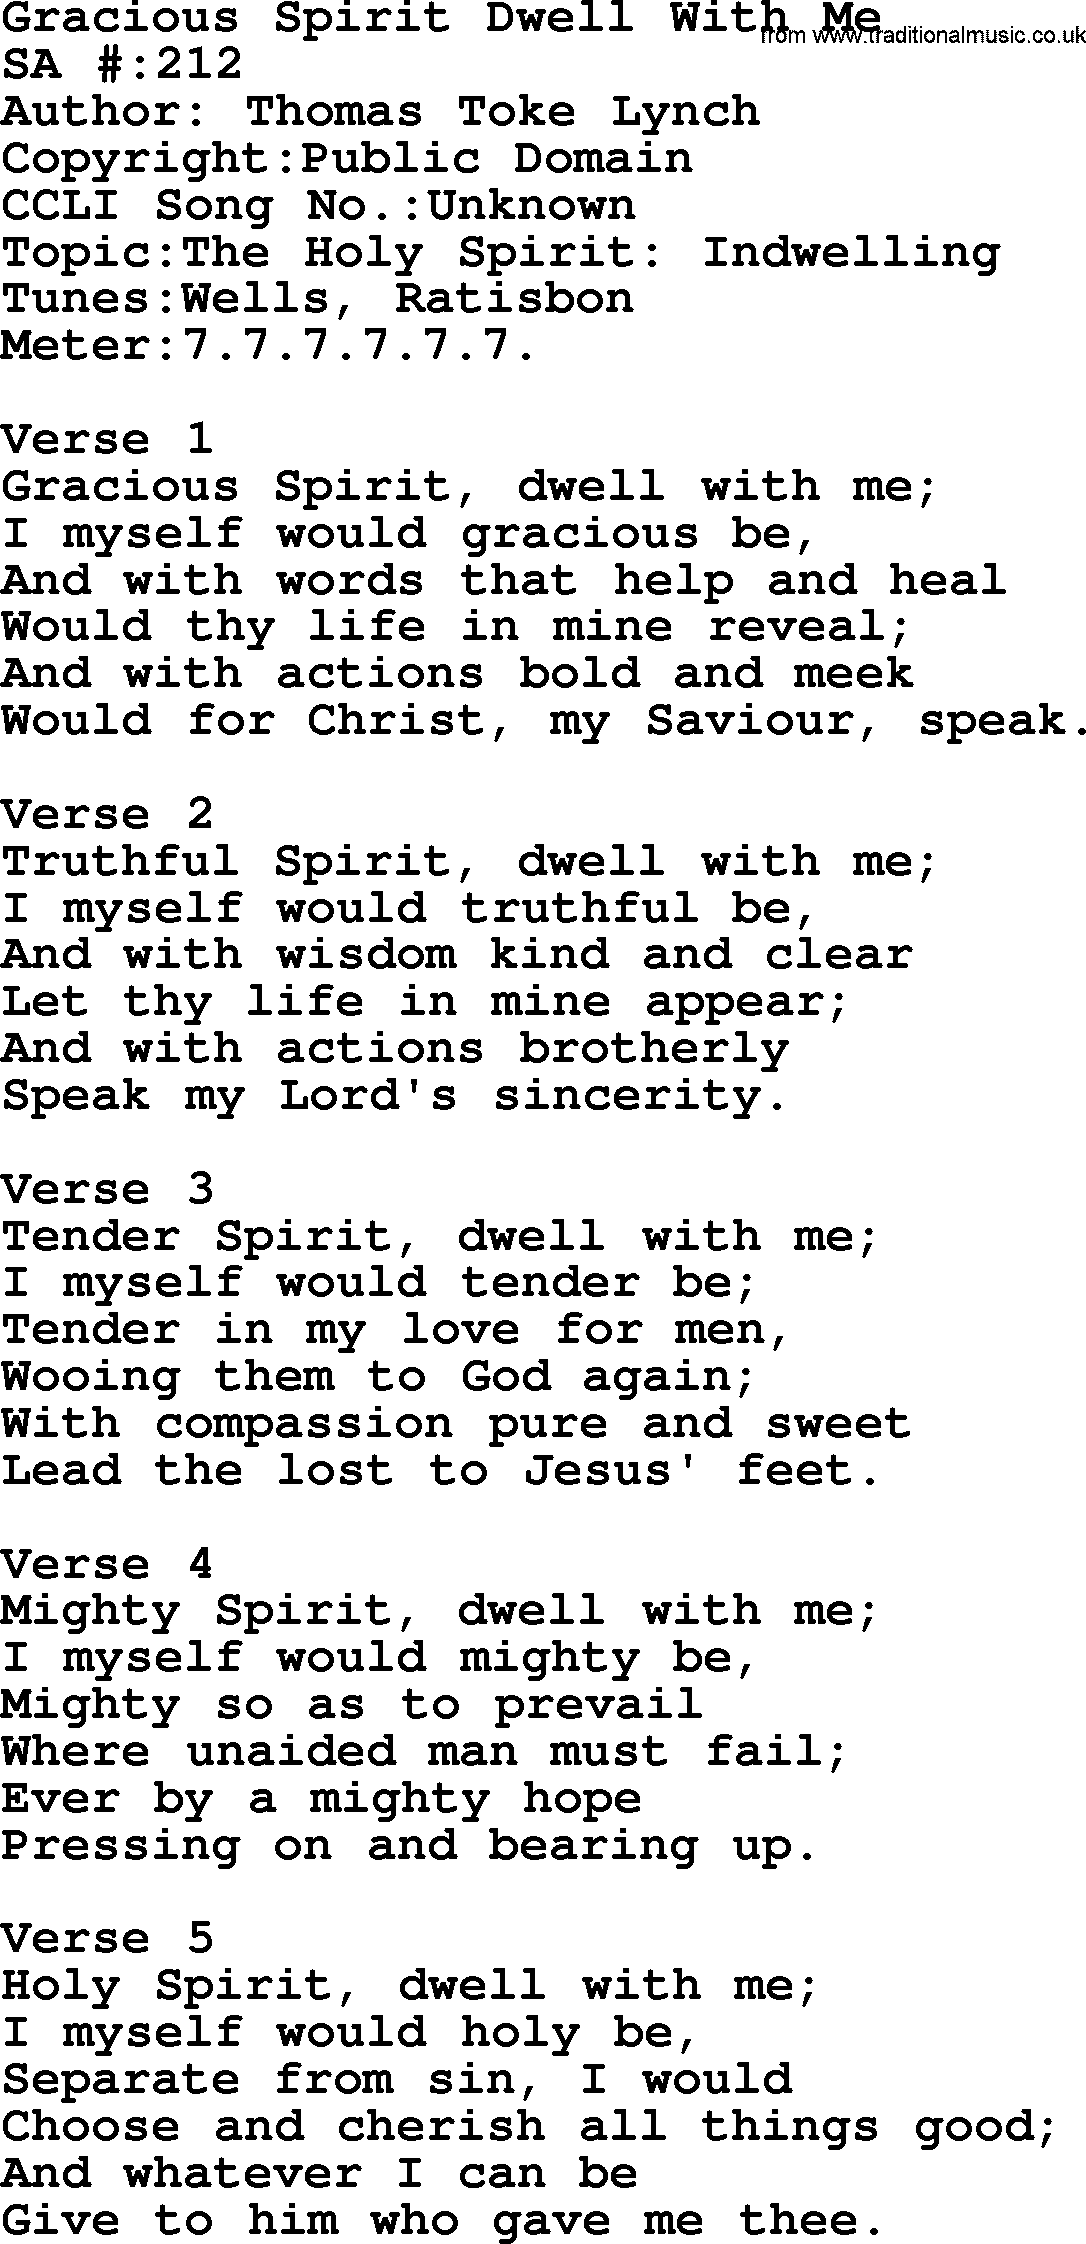 Salvation Army Hymnal, title: Gracious Spirit Dwell With Me, with lyrics and PDF,